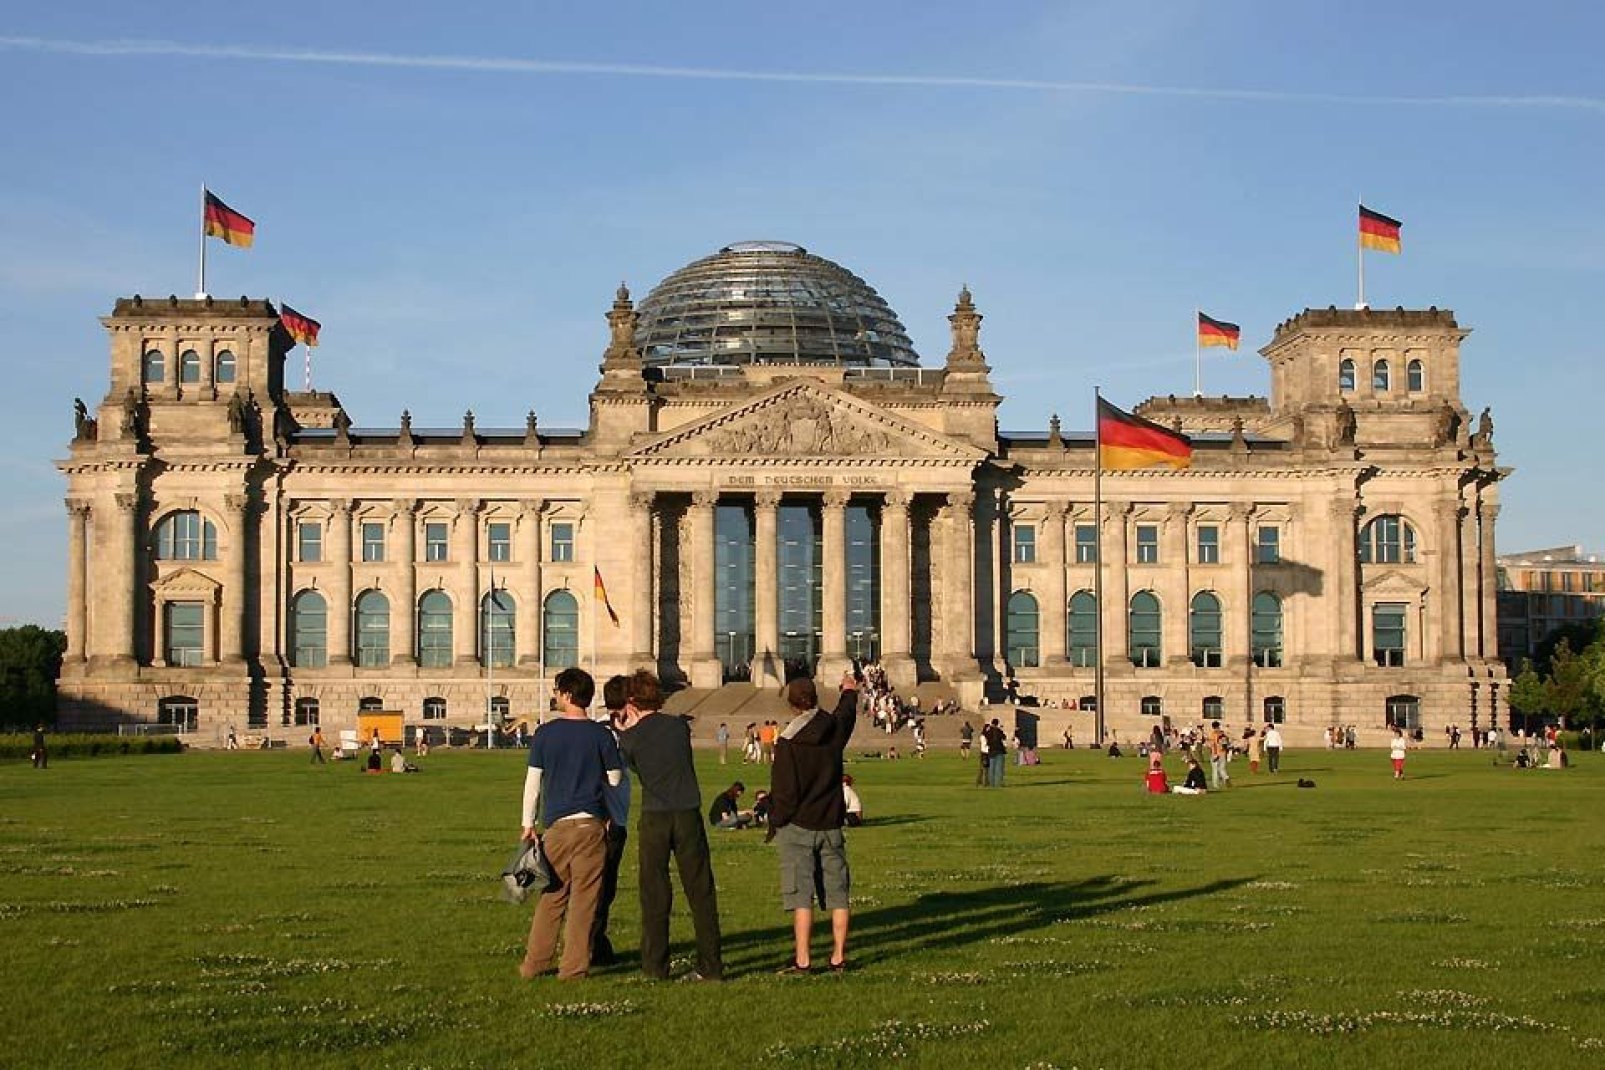 The Reichstag Palace is a very popular tourist destination.